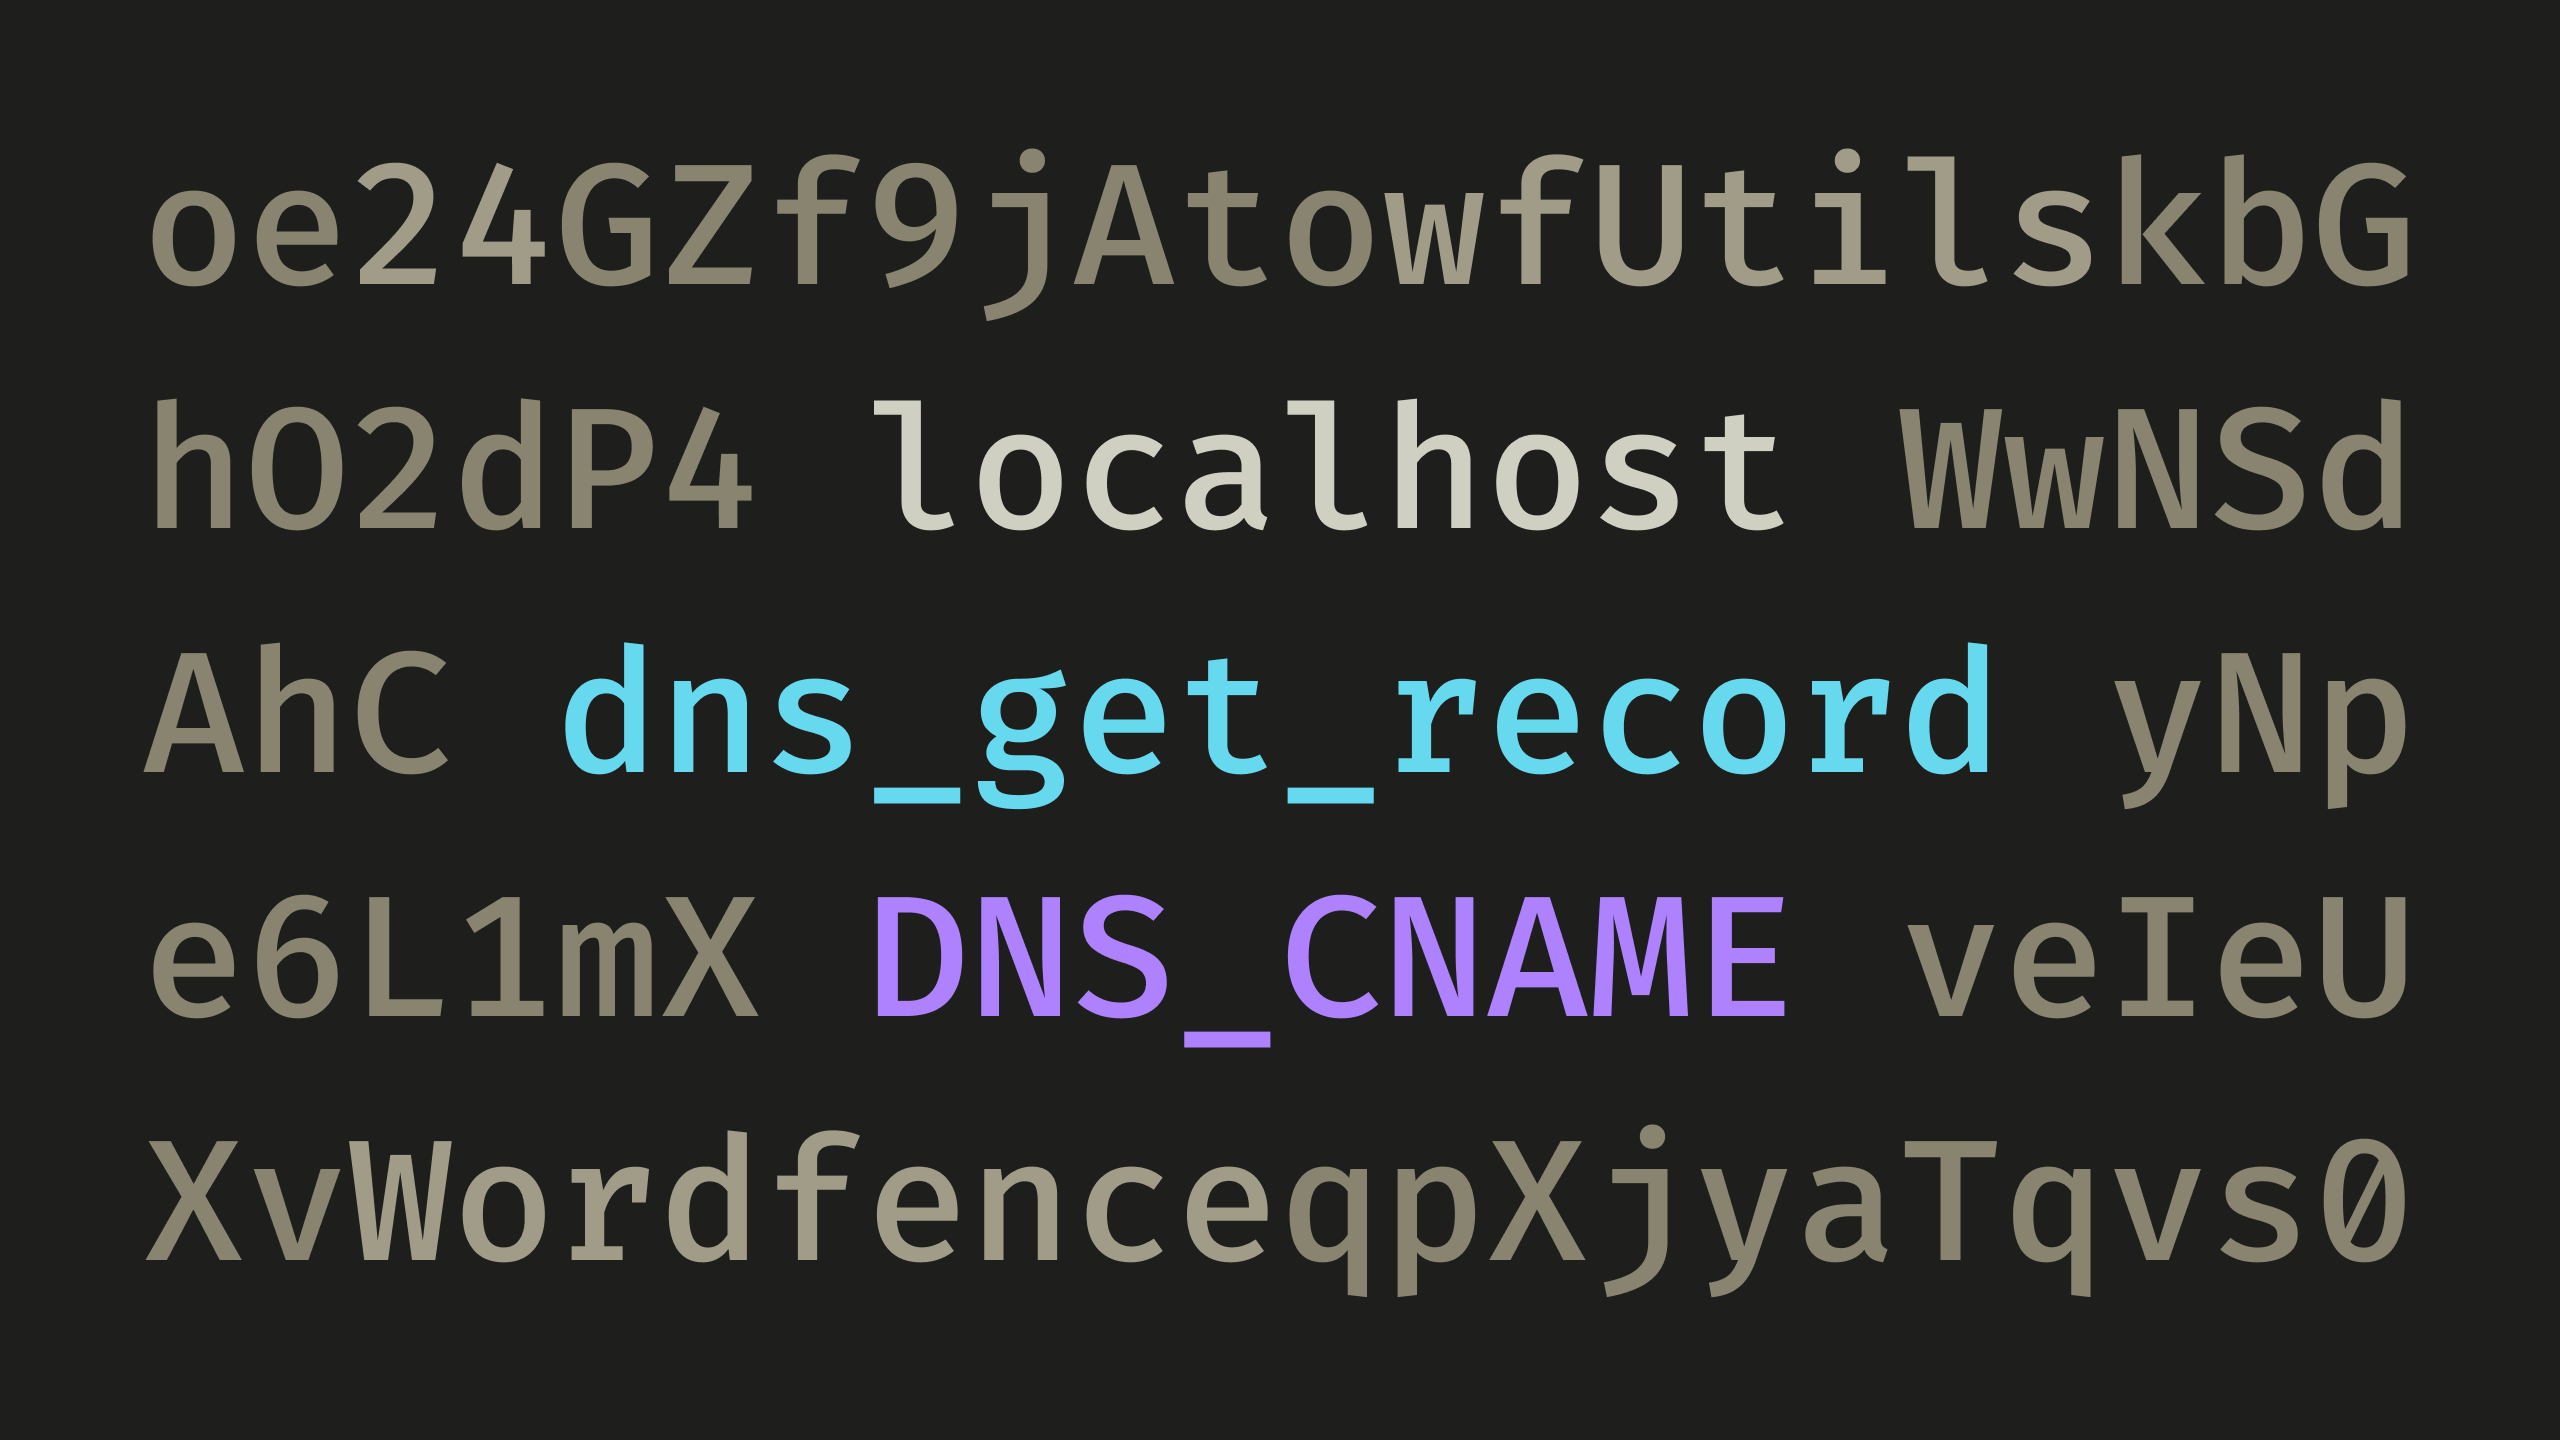 Random characters surrounding "localhost", "dns_get_record", and "DNS_CNAME".